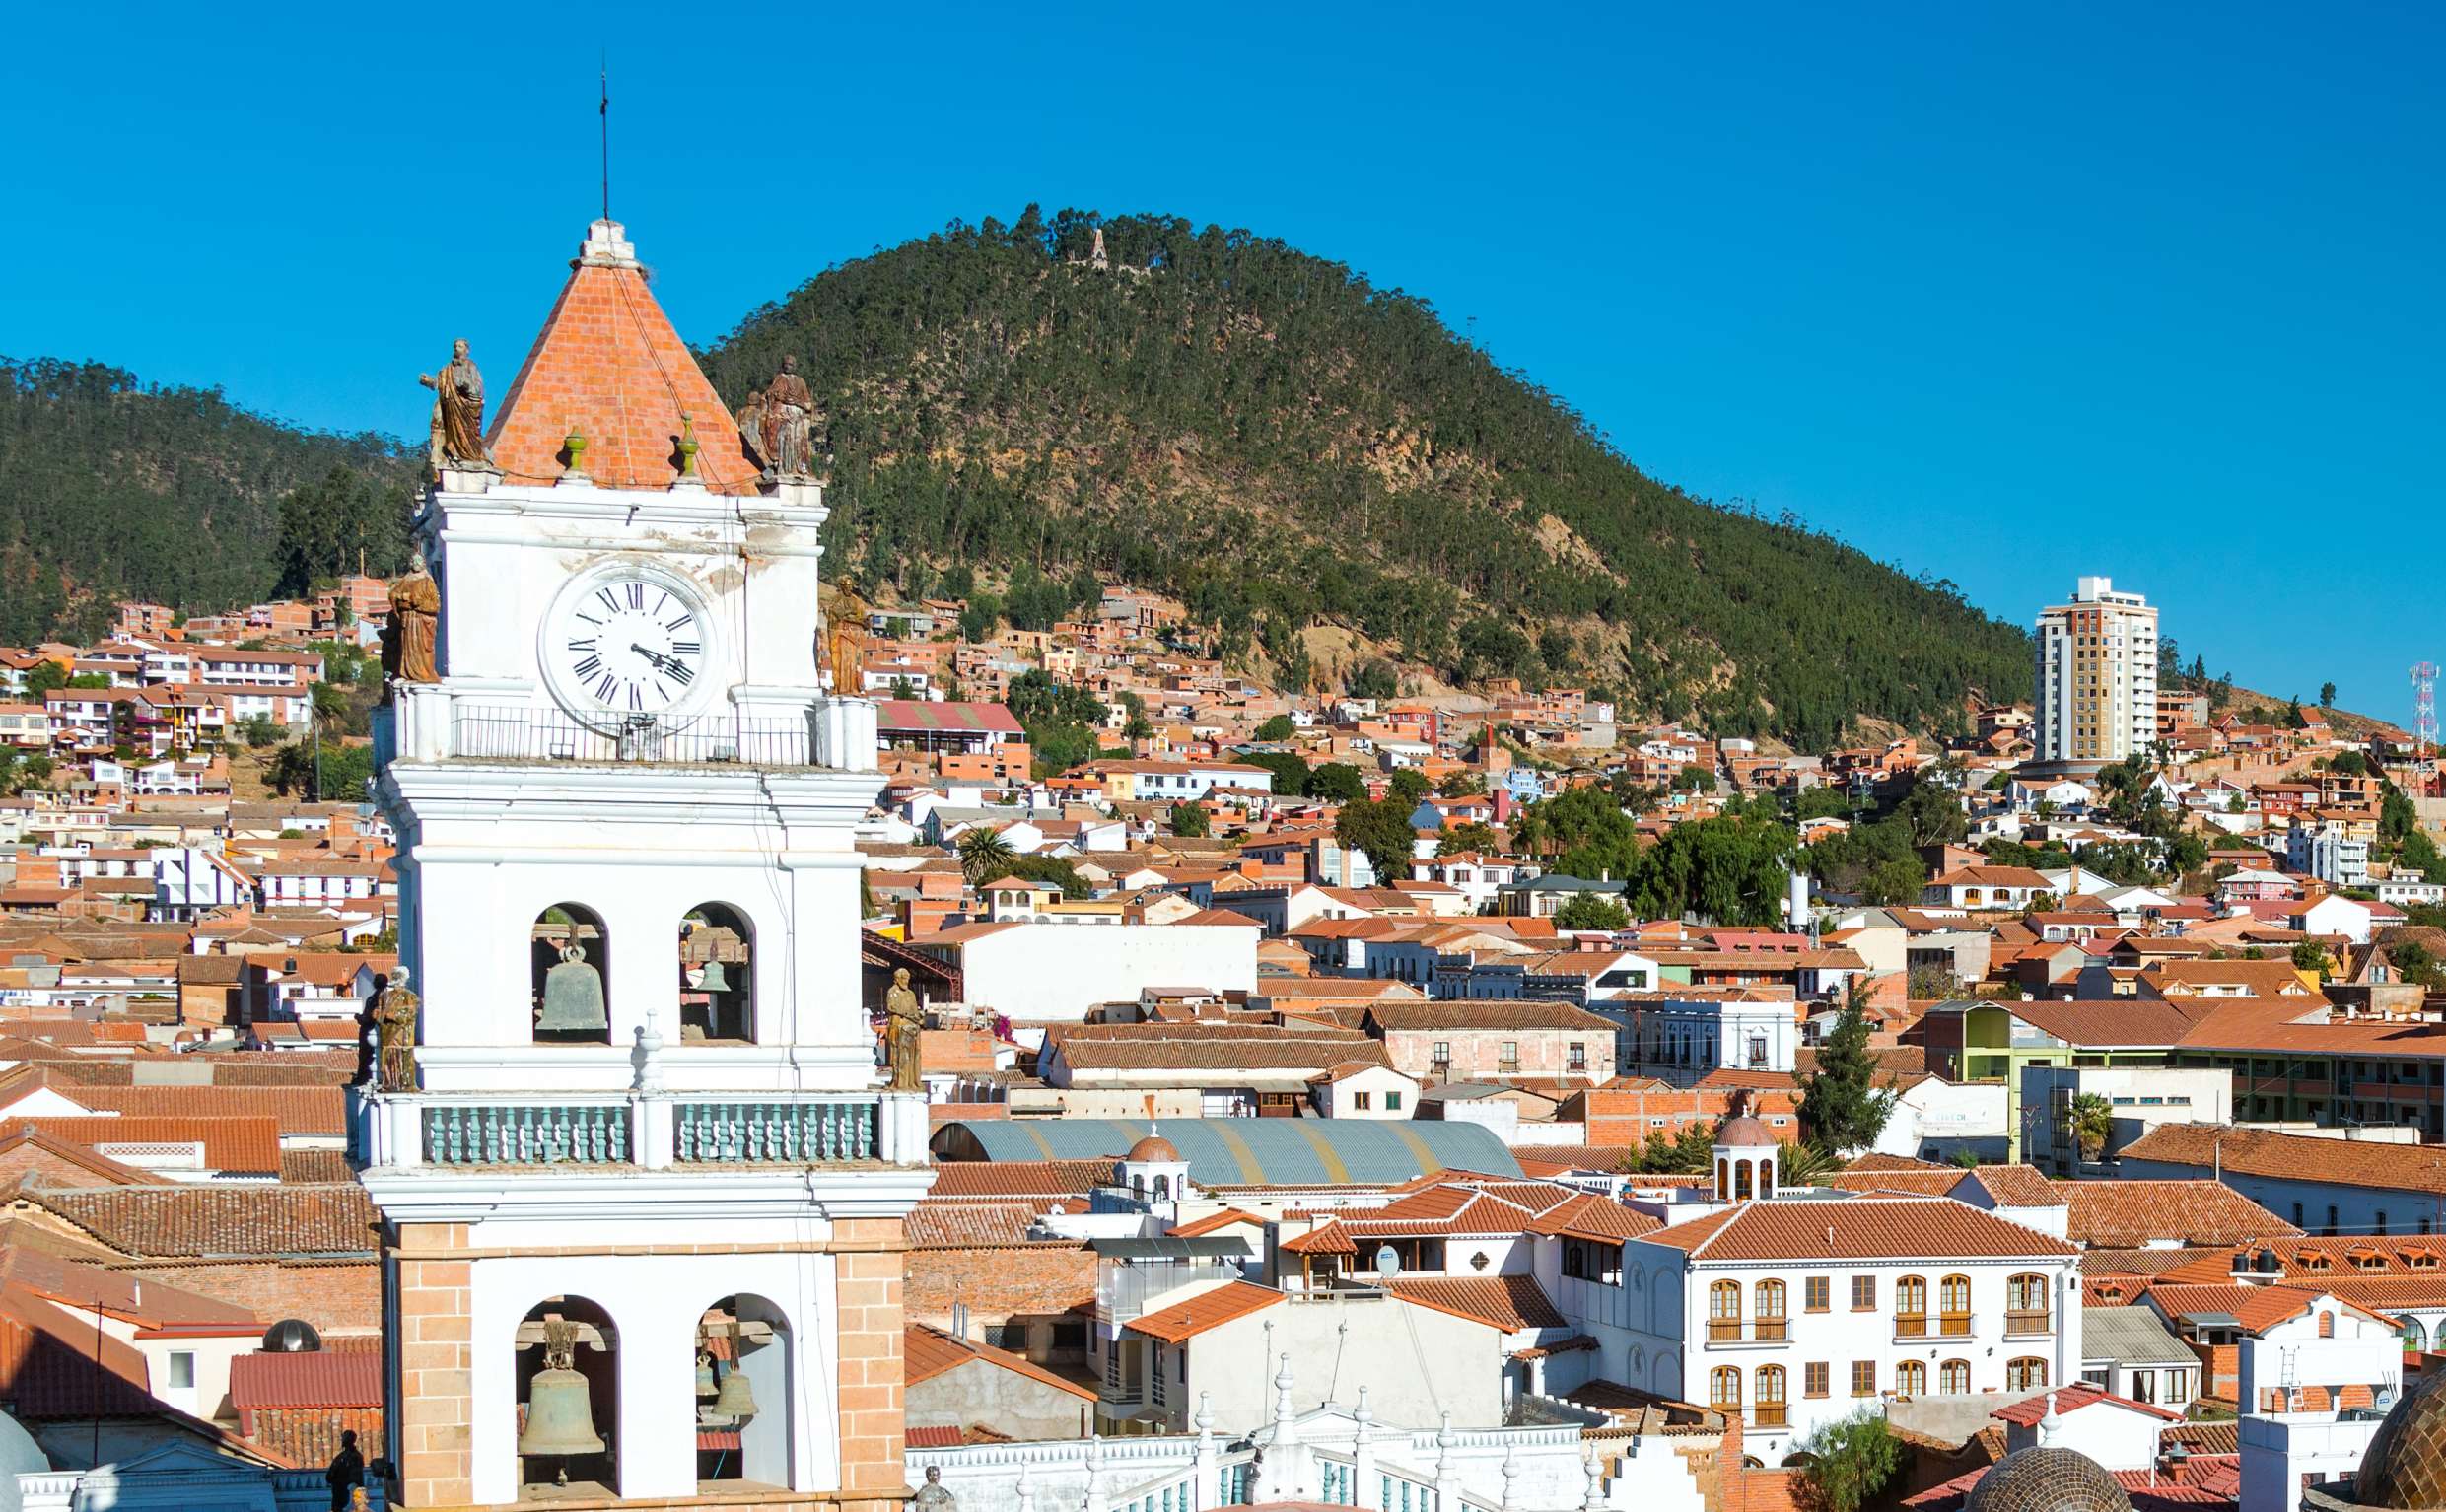 View of Sucre, Bolivia known as the White City